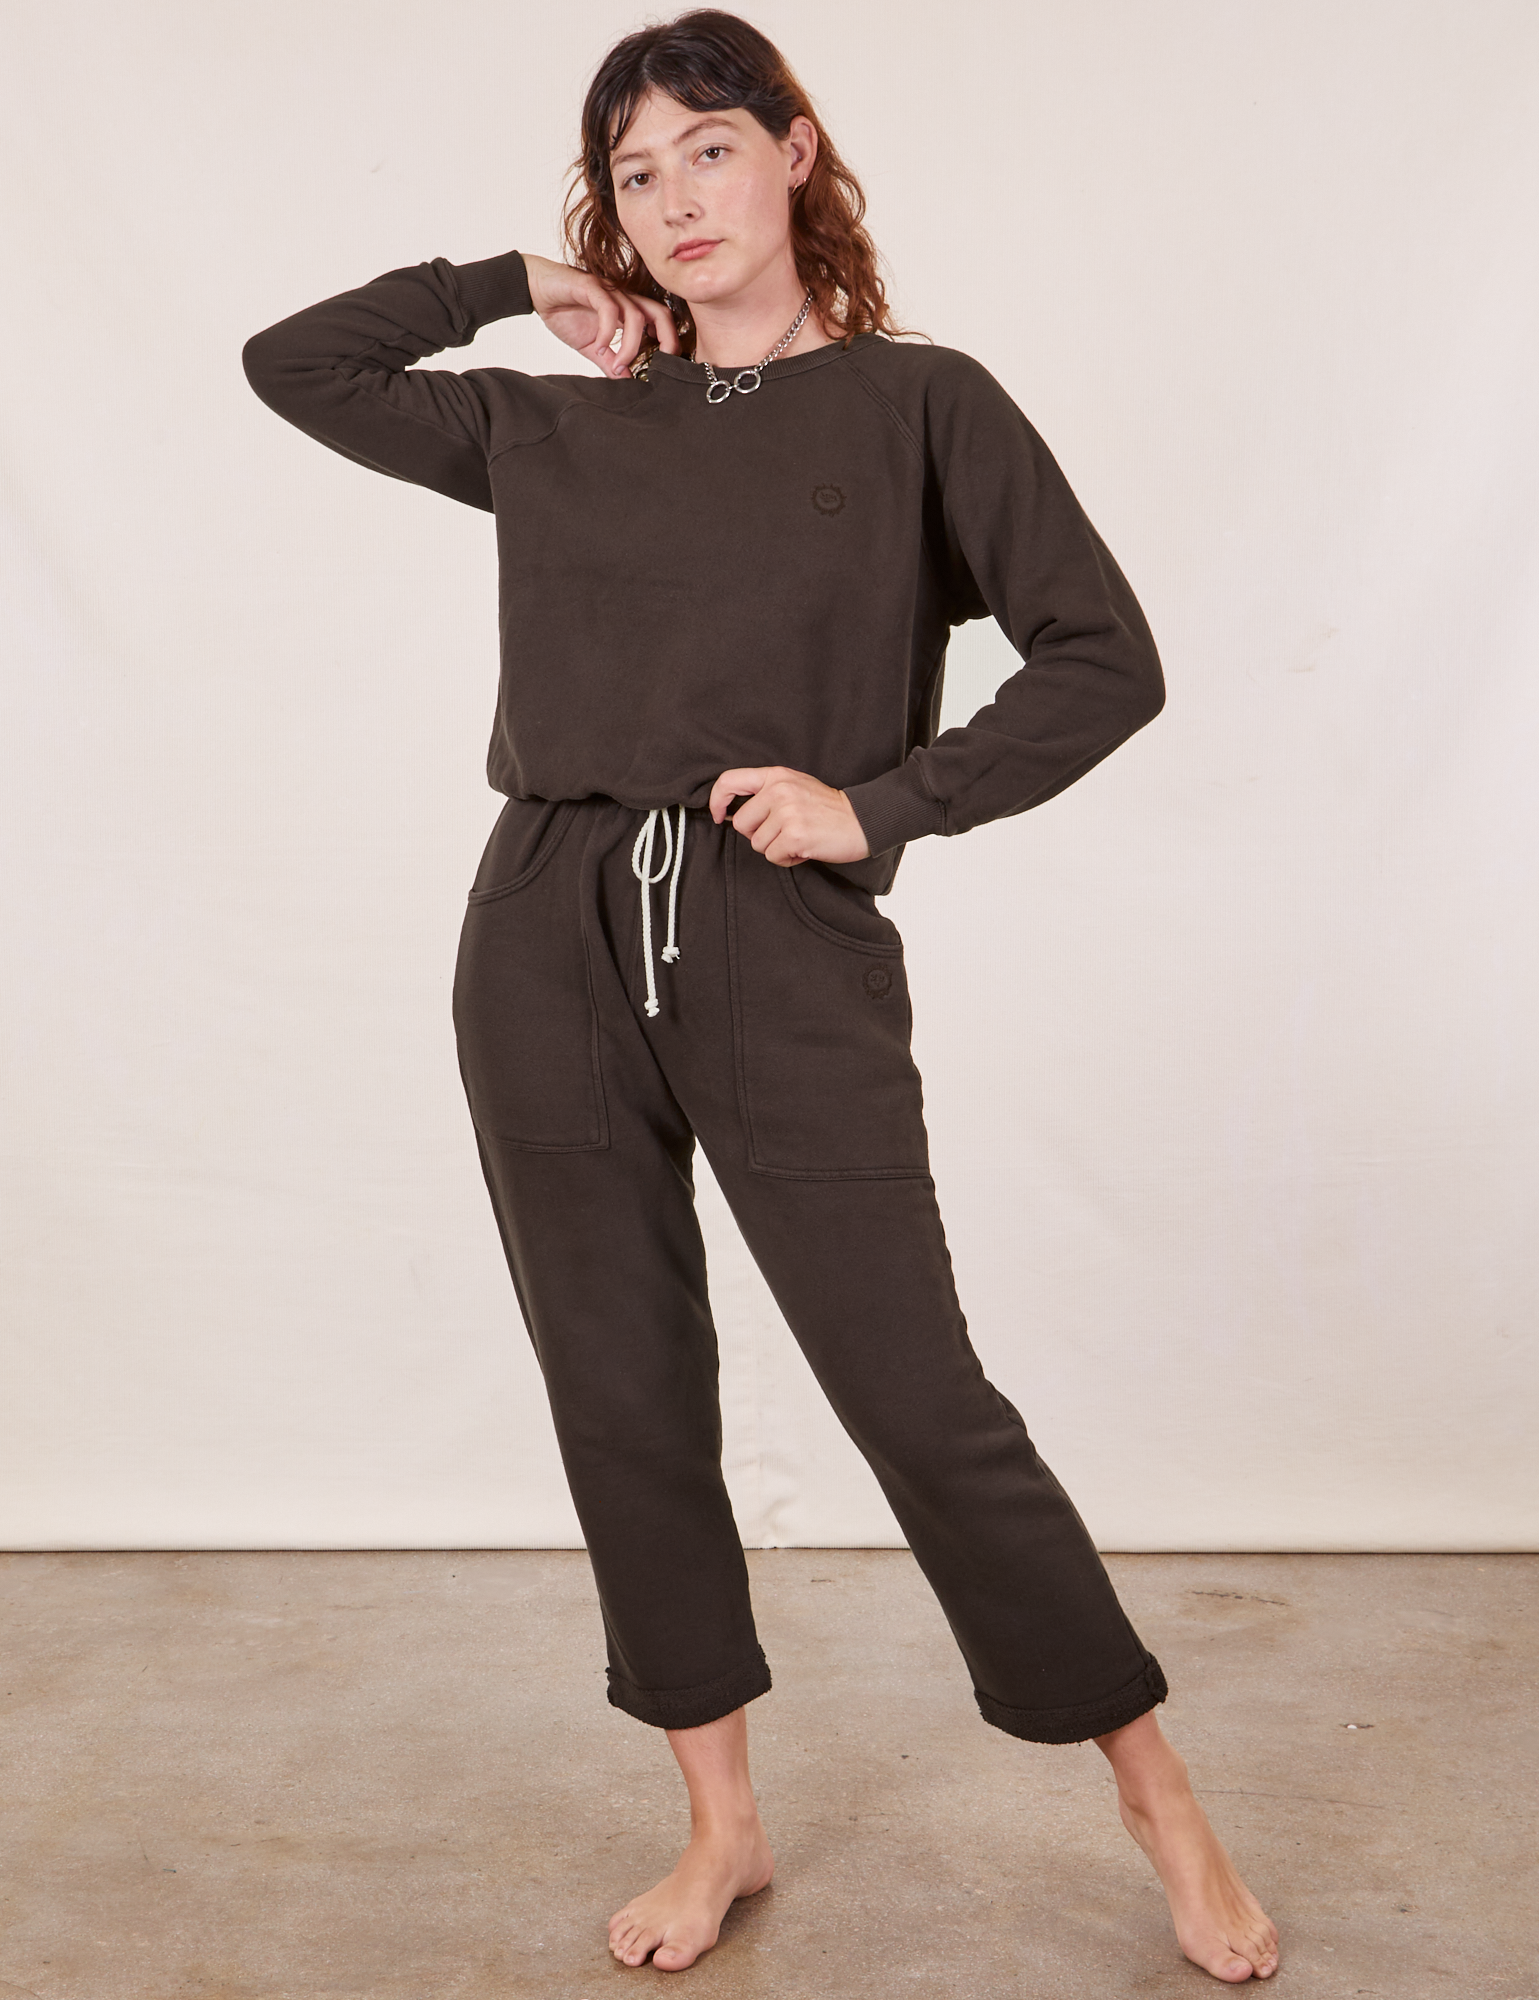 Alex is wearing Heavyweight Crew in Espresso Brown and matching Cropped Rolled Cuff Sweatpants